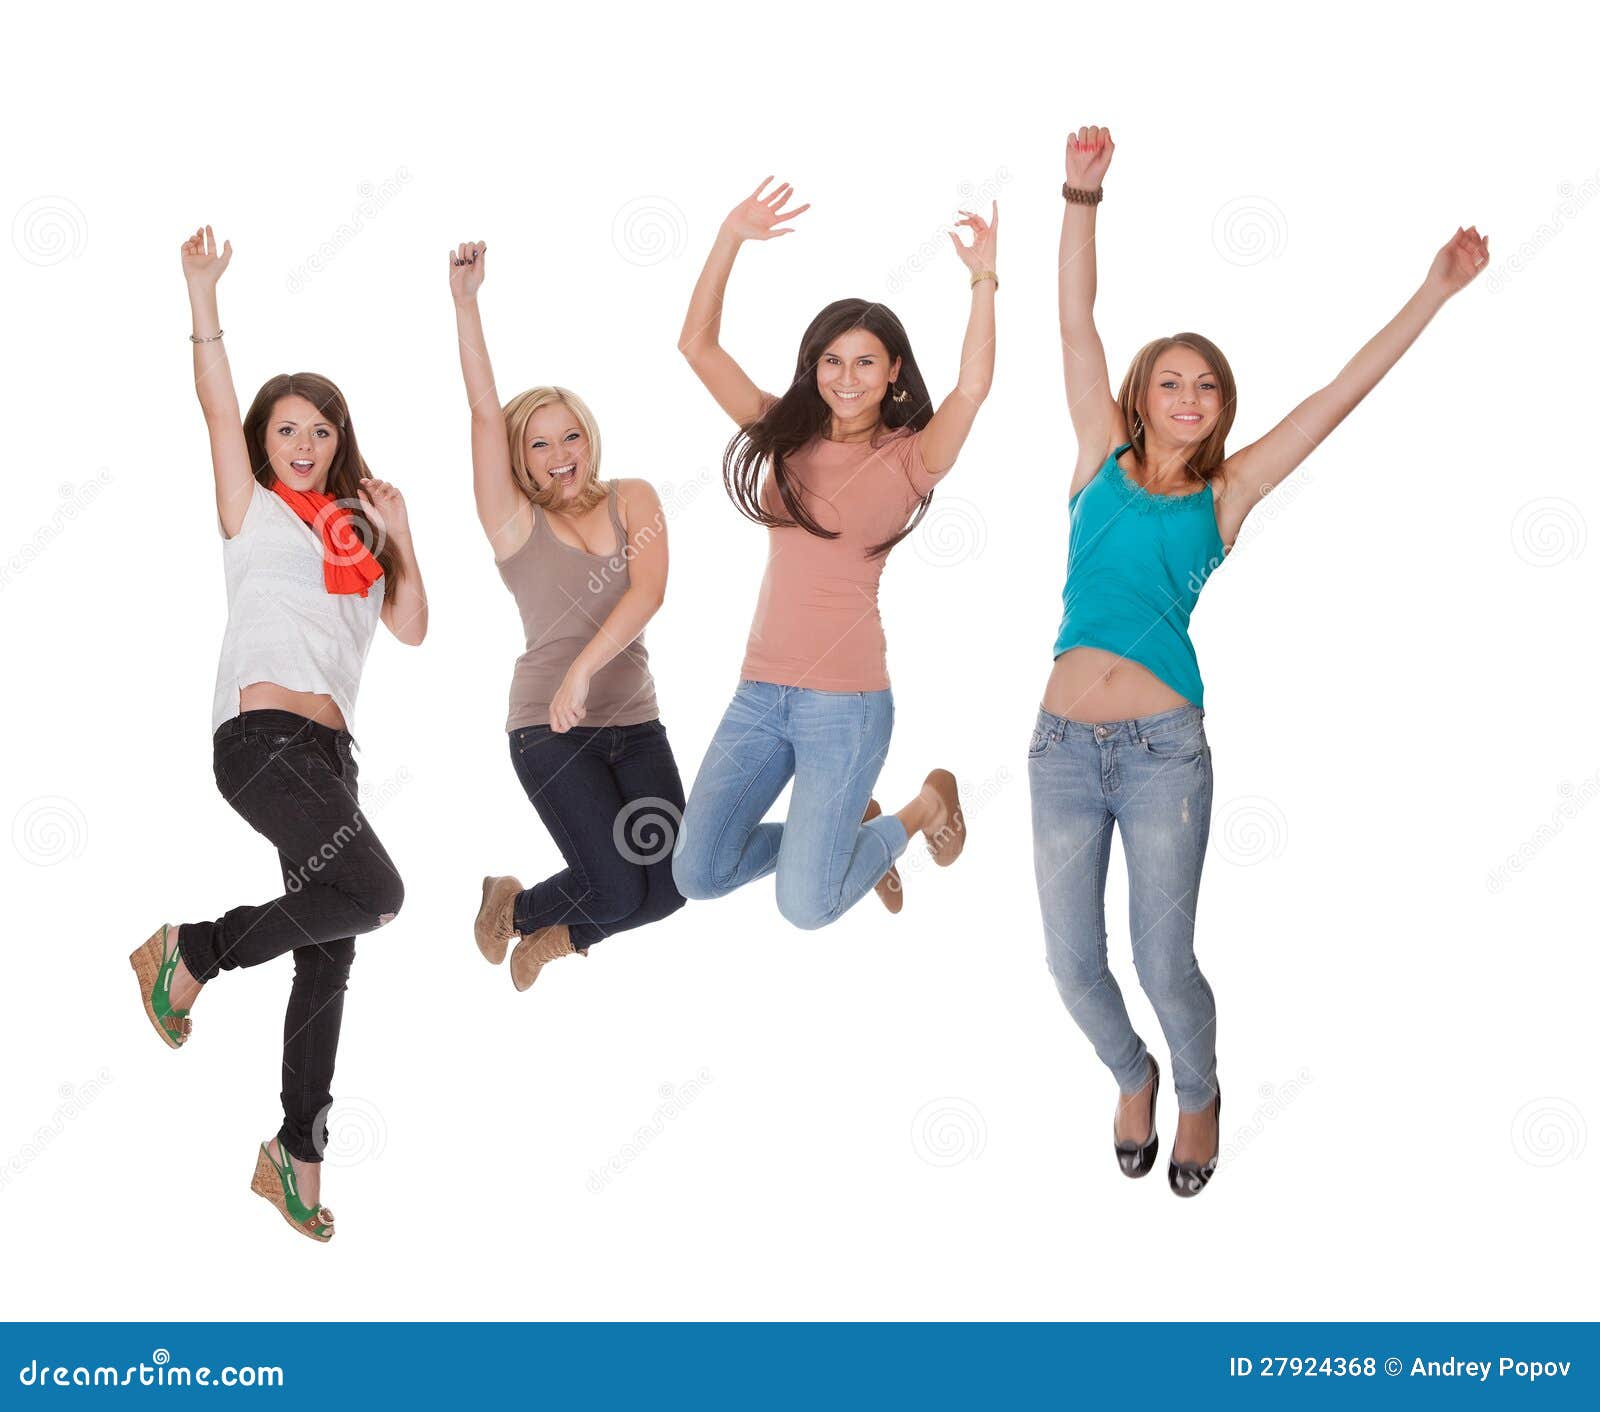 clipart woman jumping for joy - photo #28